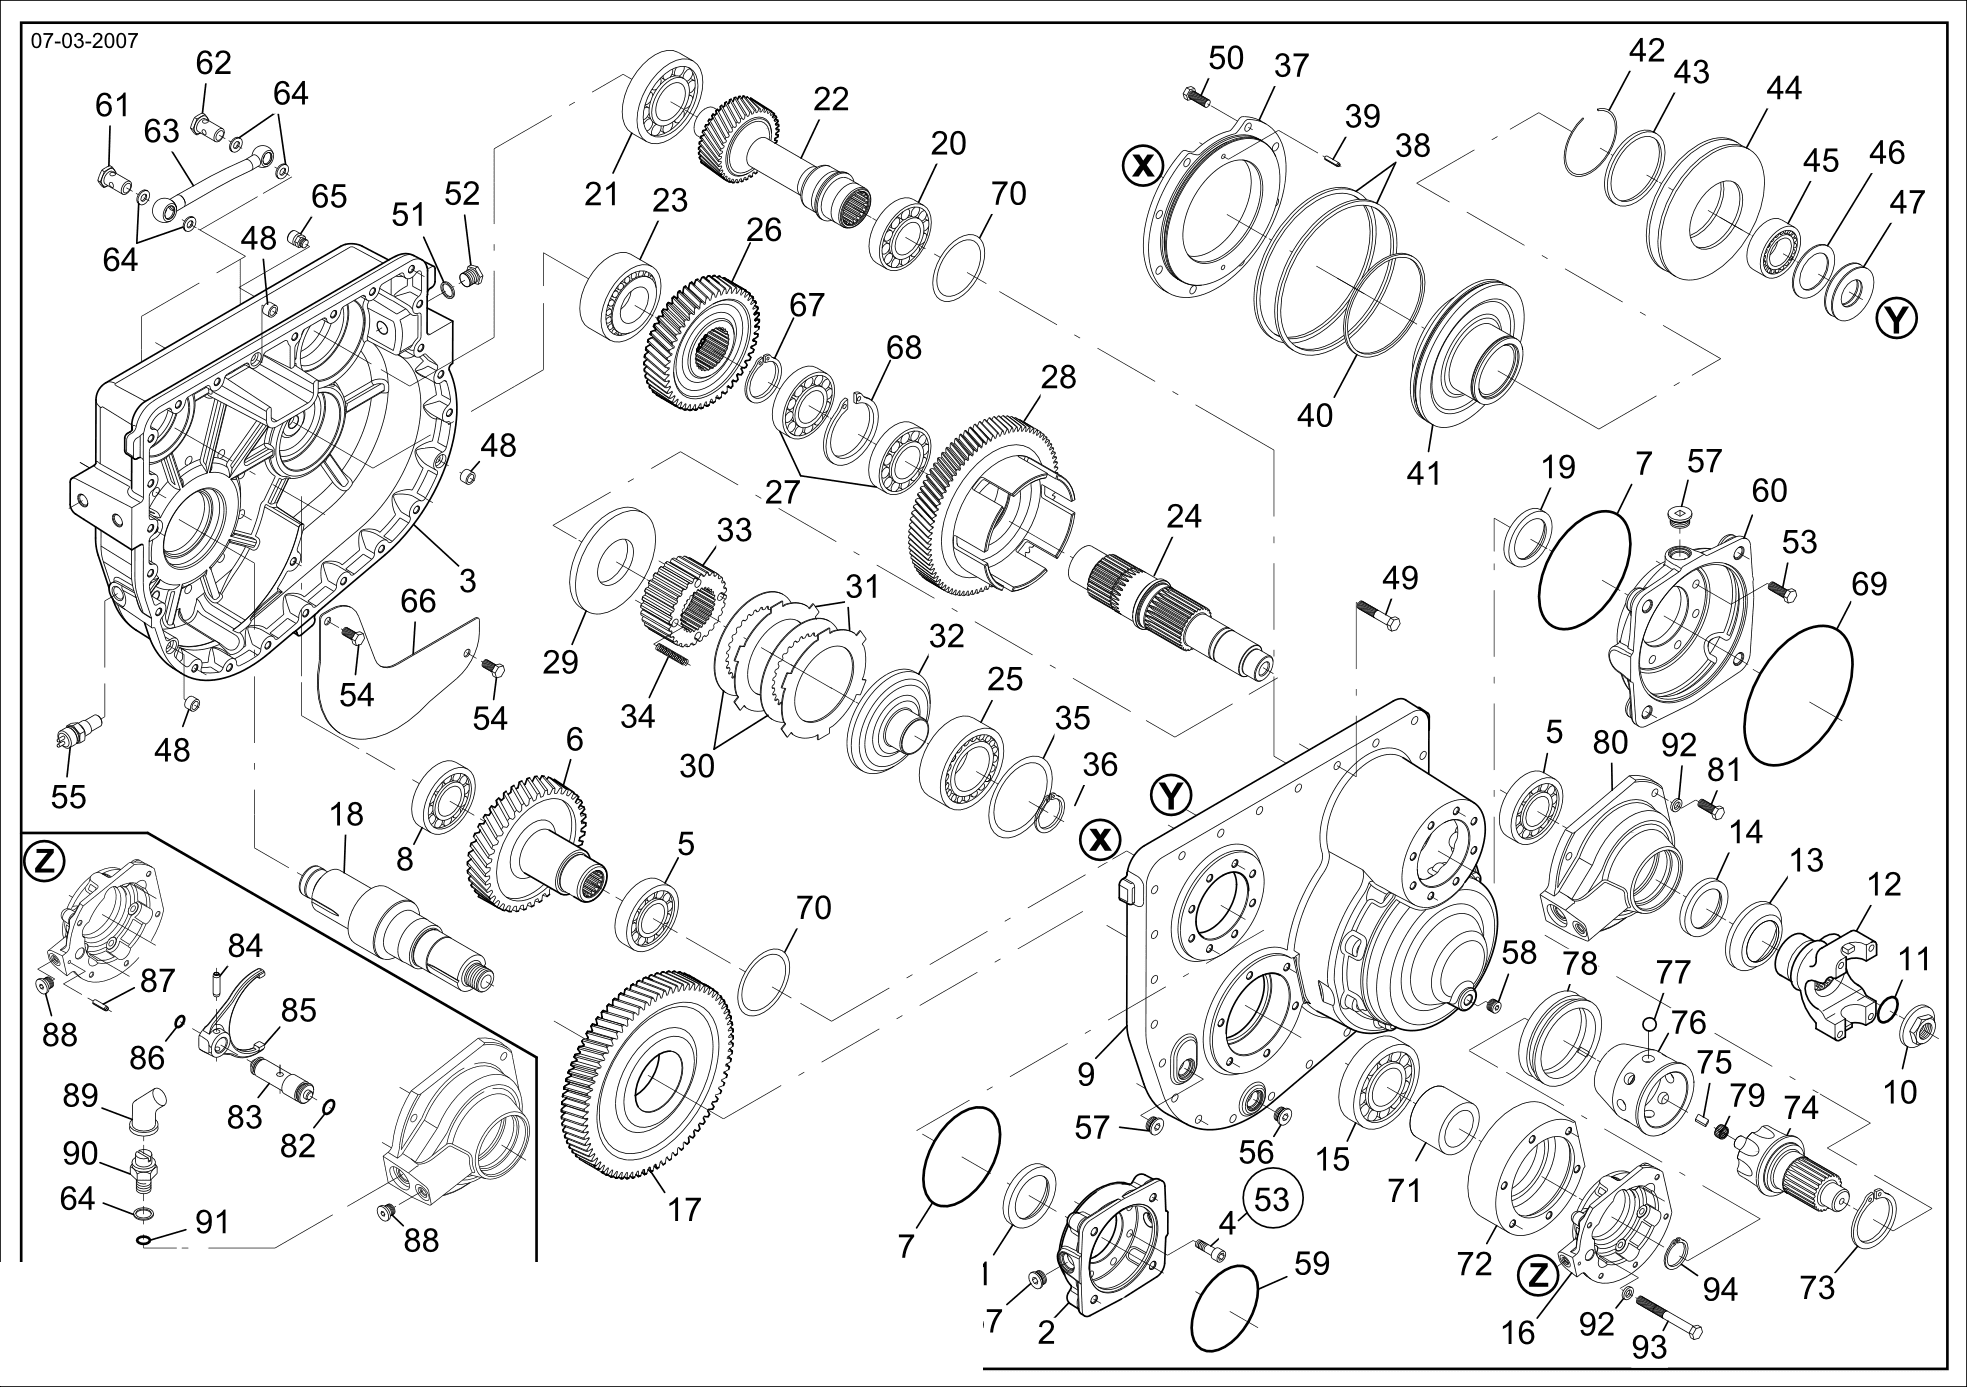 drawing for CNH NEW HOLLAND 84144834 - REDUCTION BUSHING (figure 5)